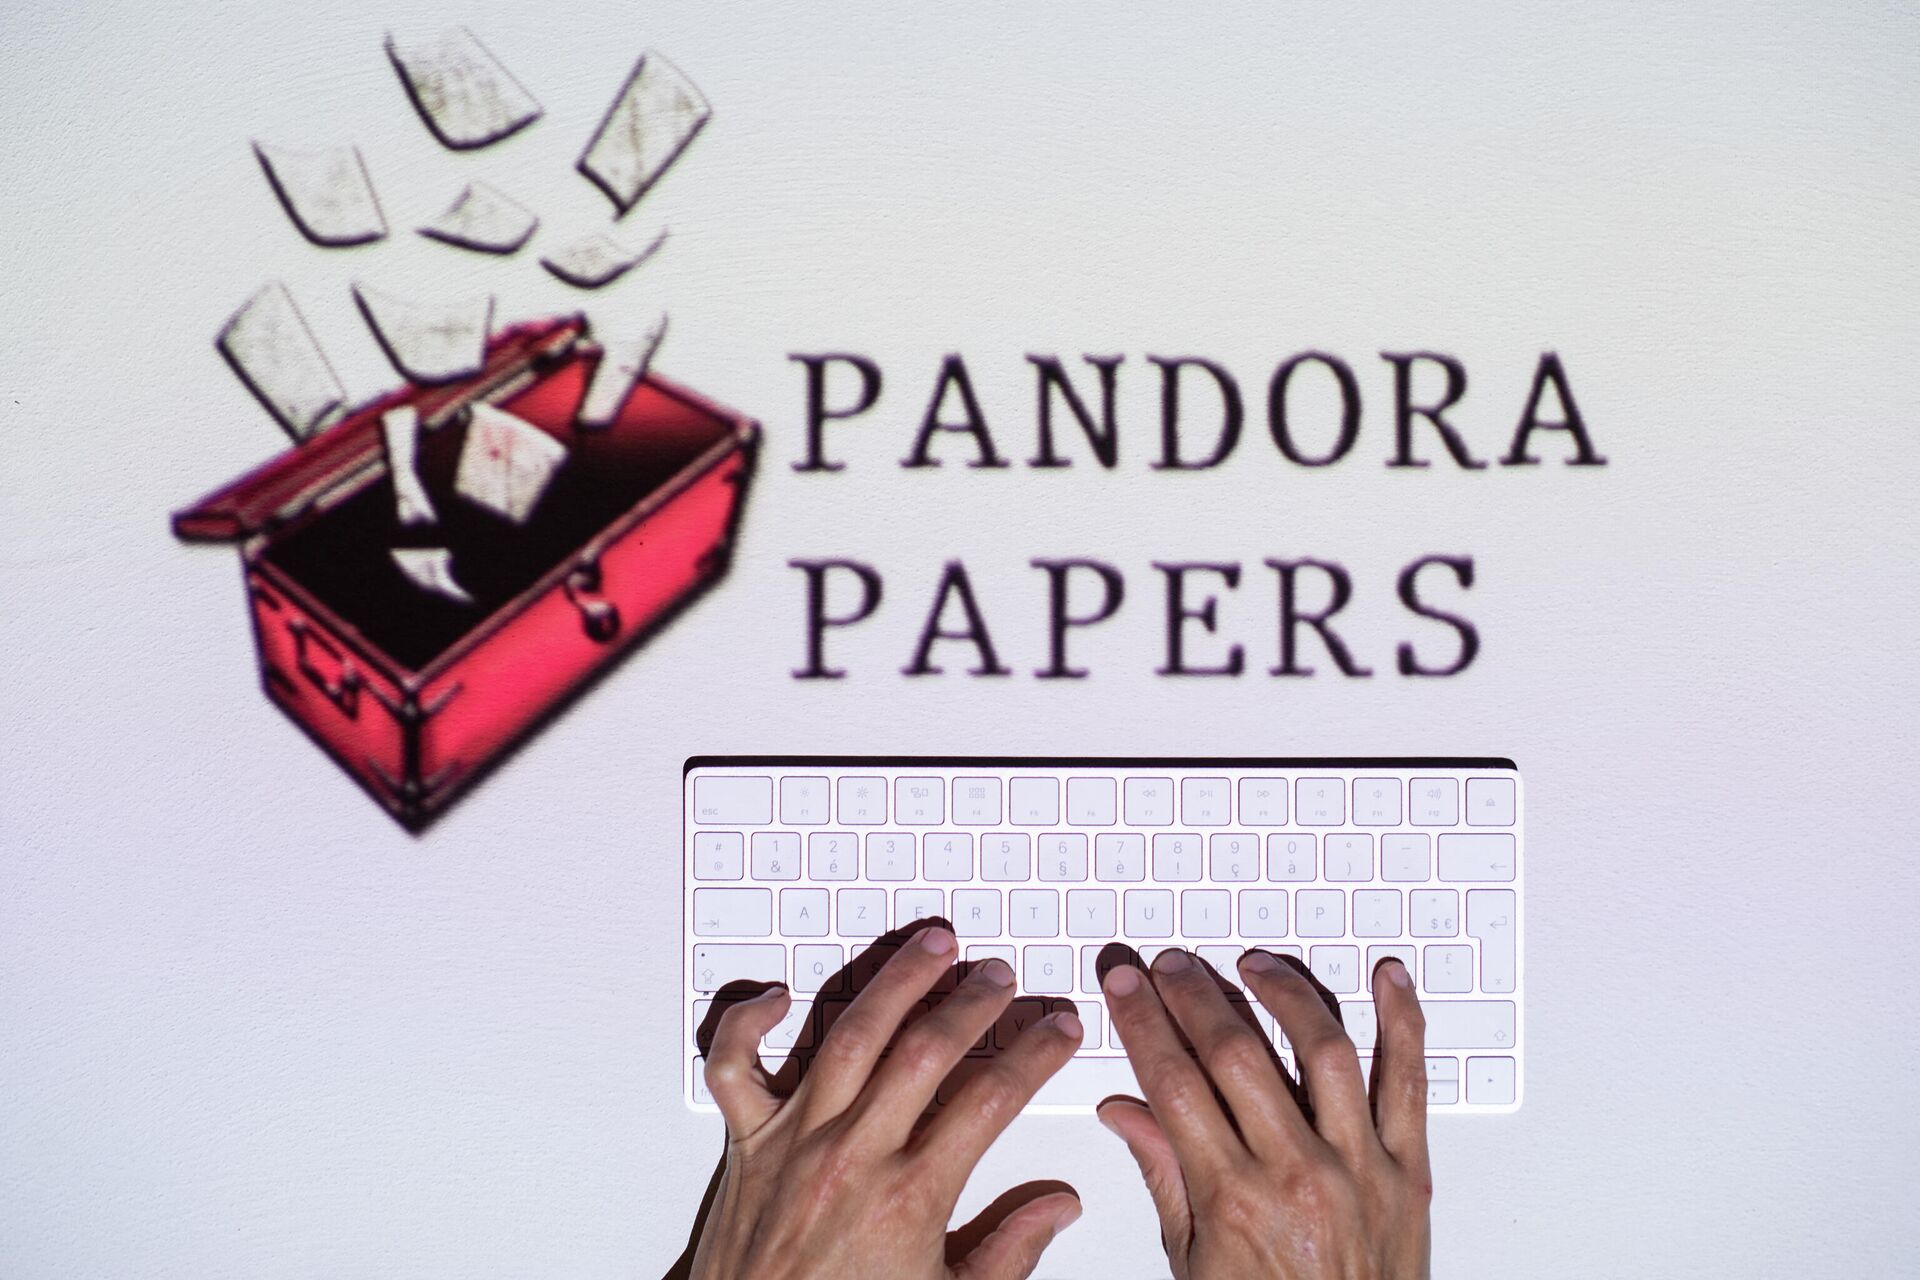 This photograph illustration shows hands typing on a keyboard in front of the logo of Pandora Papers, in Lavau-sur-Loire, western France, on October 4, 2021 - Sputnik International, 1920, 11.10.2021